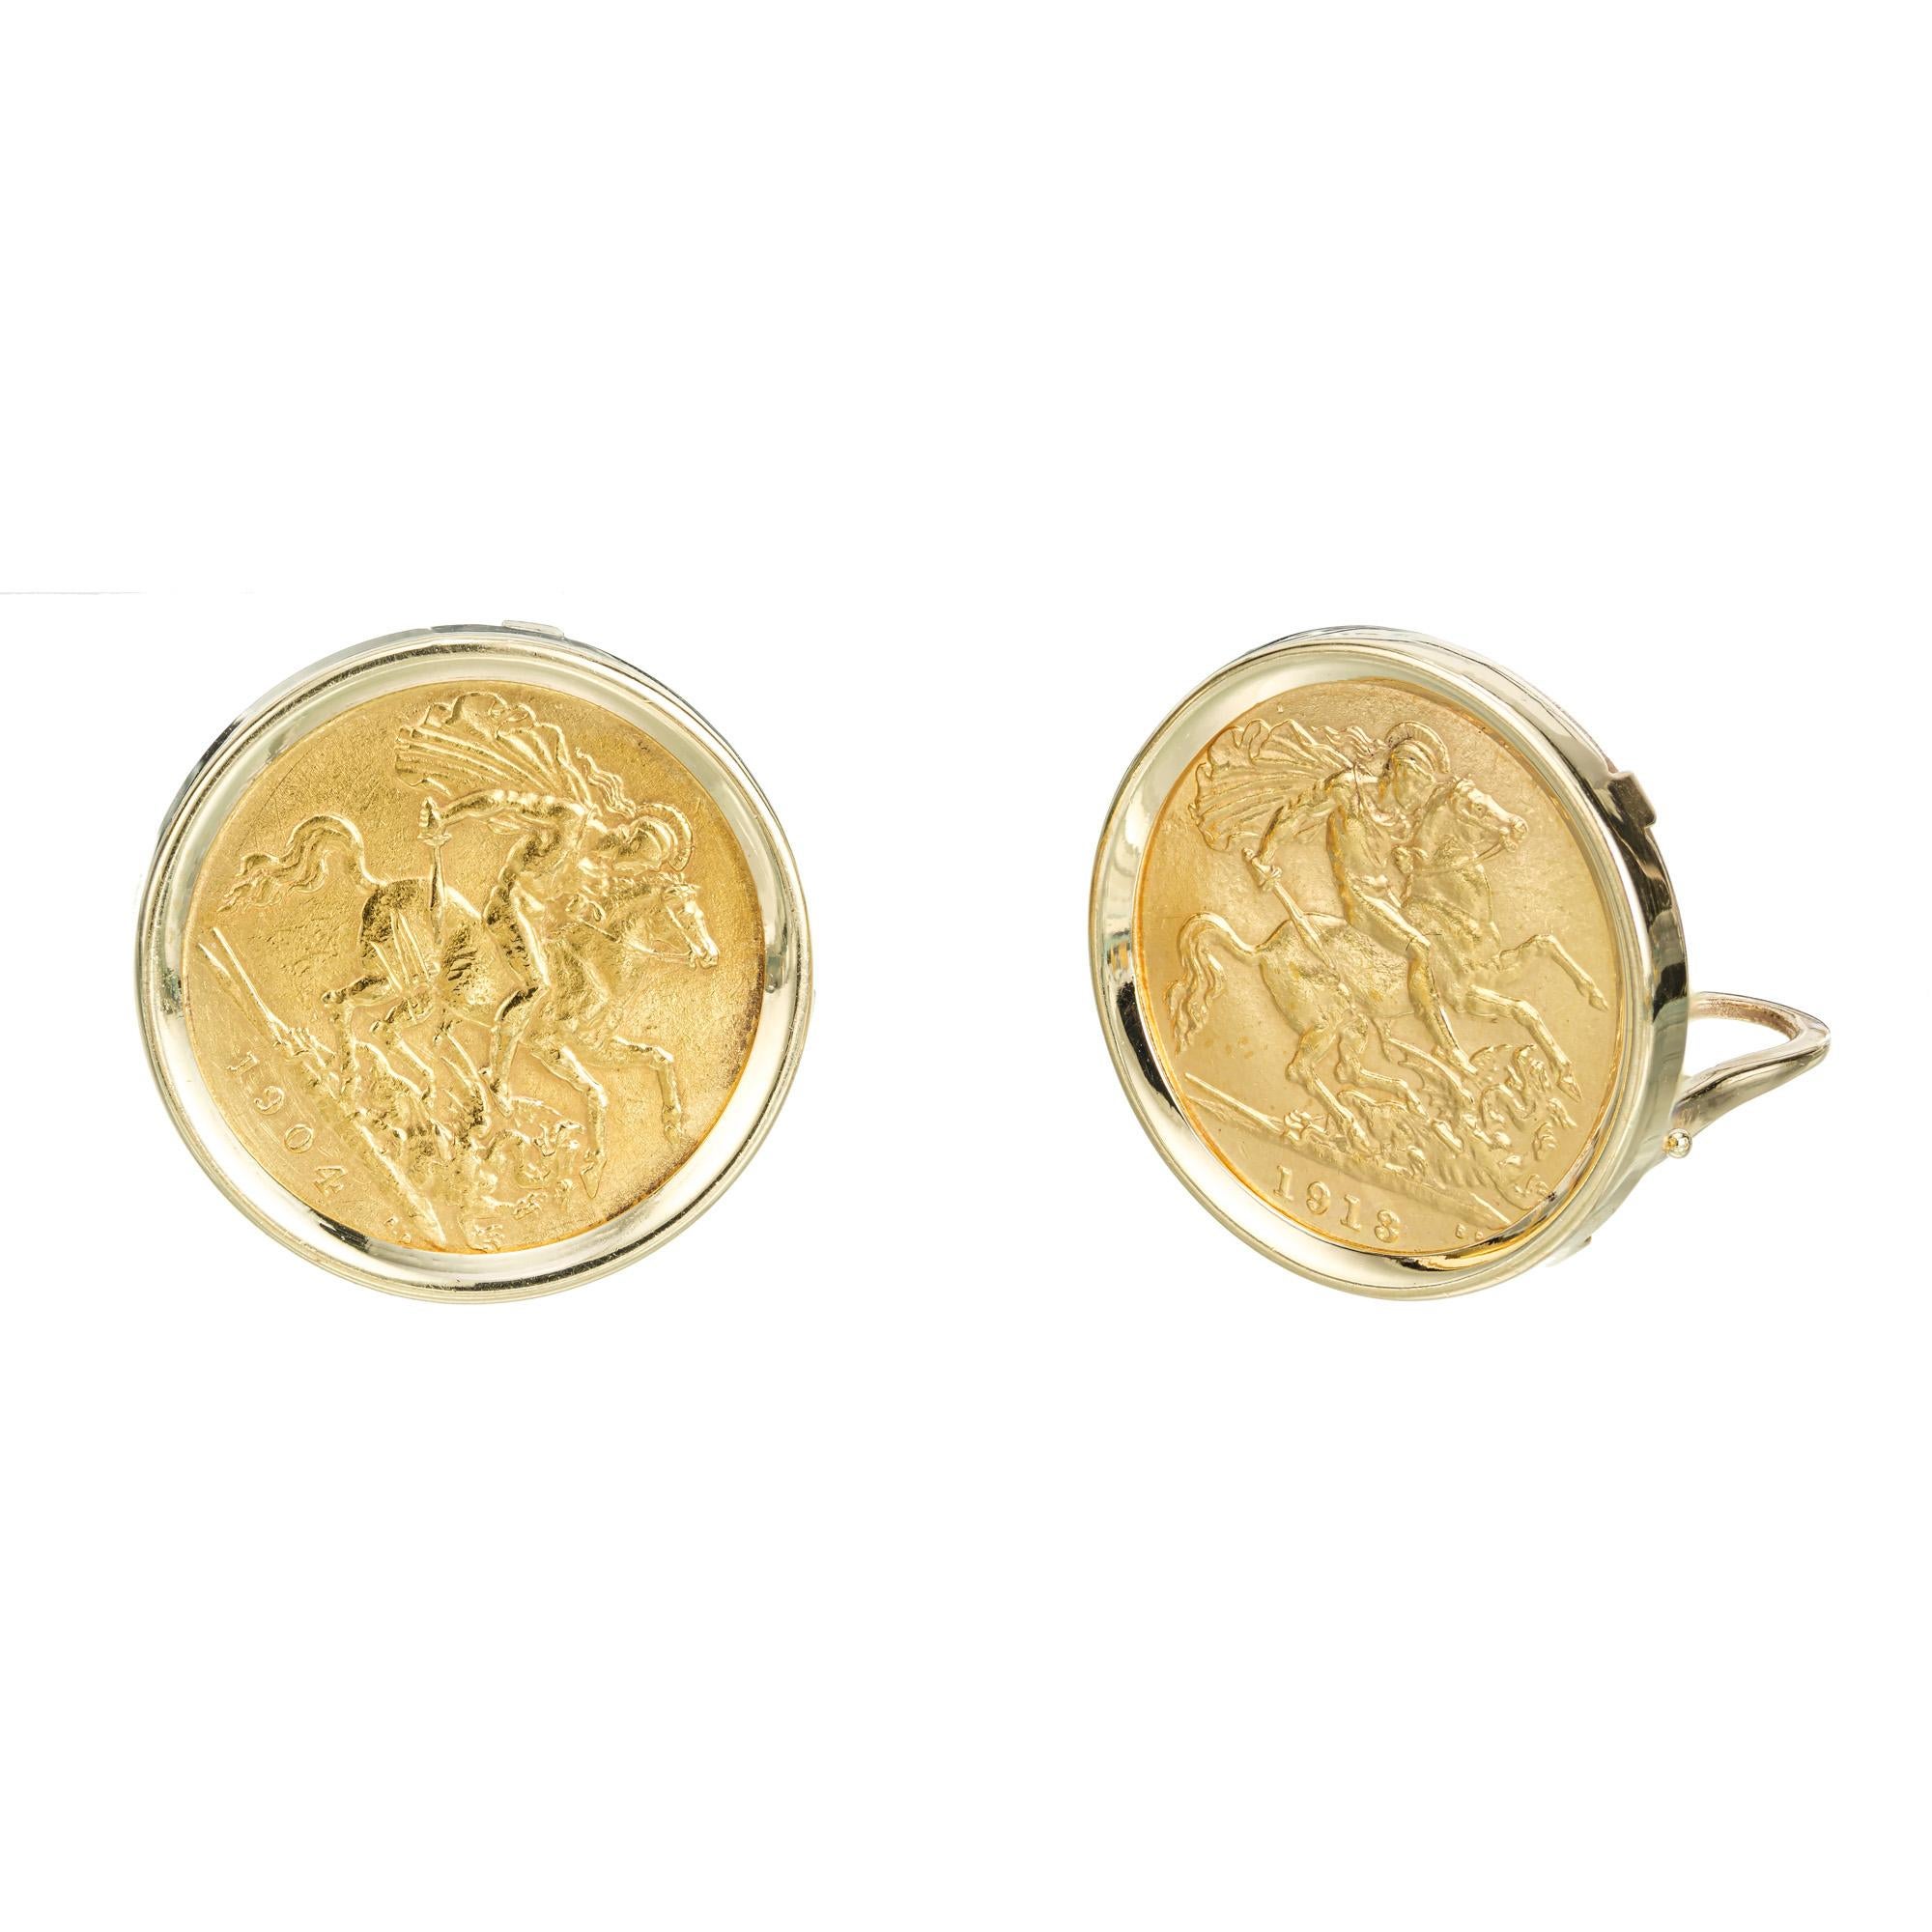 Early 1900's  English gold Sovereign Coin clip post 14k yellow gold earrings, each showing a solider on a horse. 

14k yellow gold 
Stamped: 14k 585
19.1 grams
Top to bottom: 20.75mm or .81 Inches
Width: 20.75mm or .81 Inches
Depth or thickness: